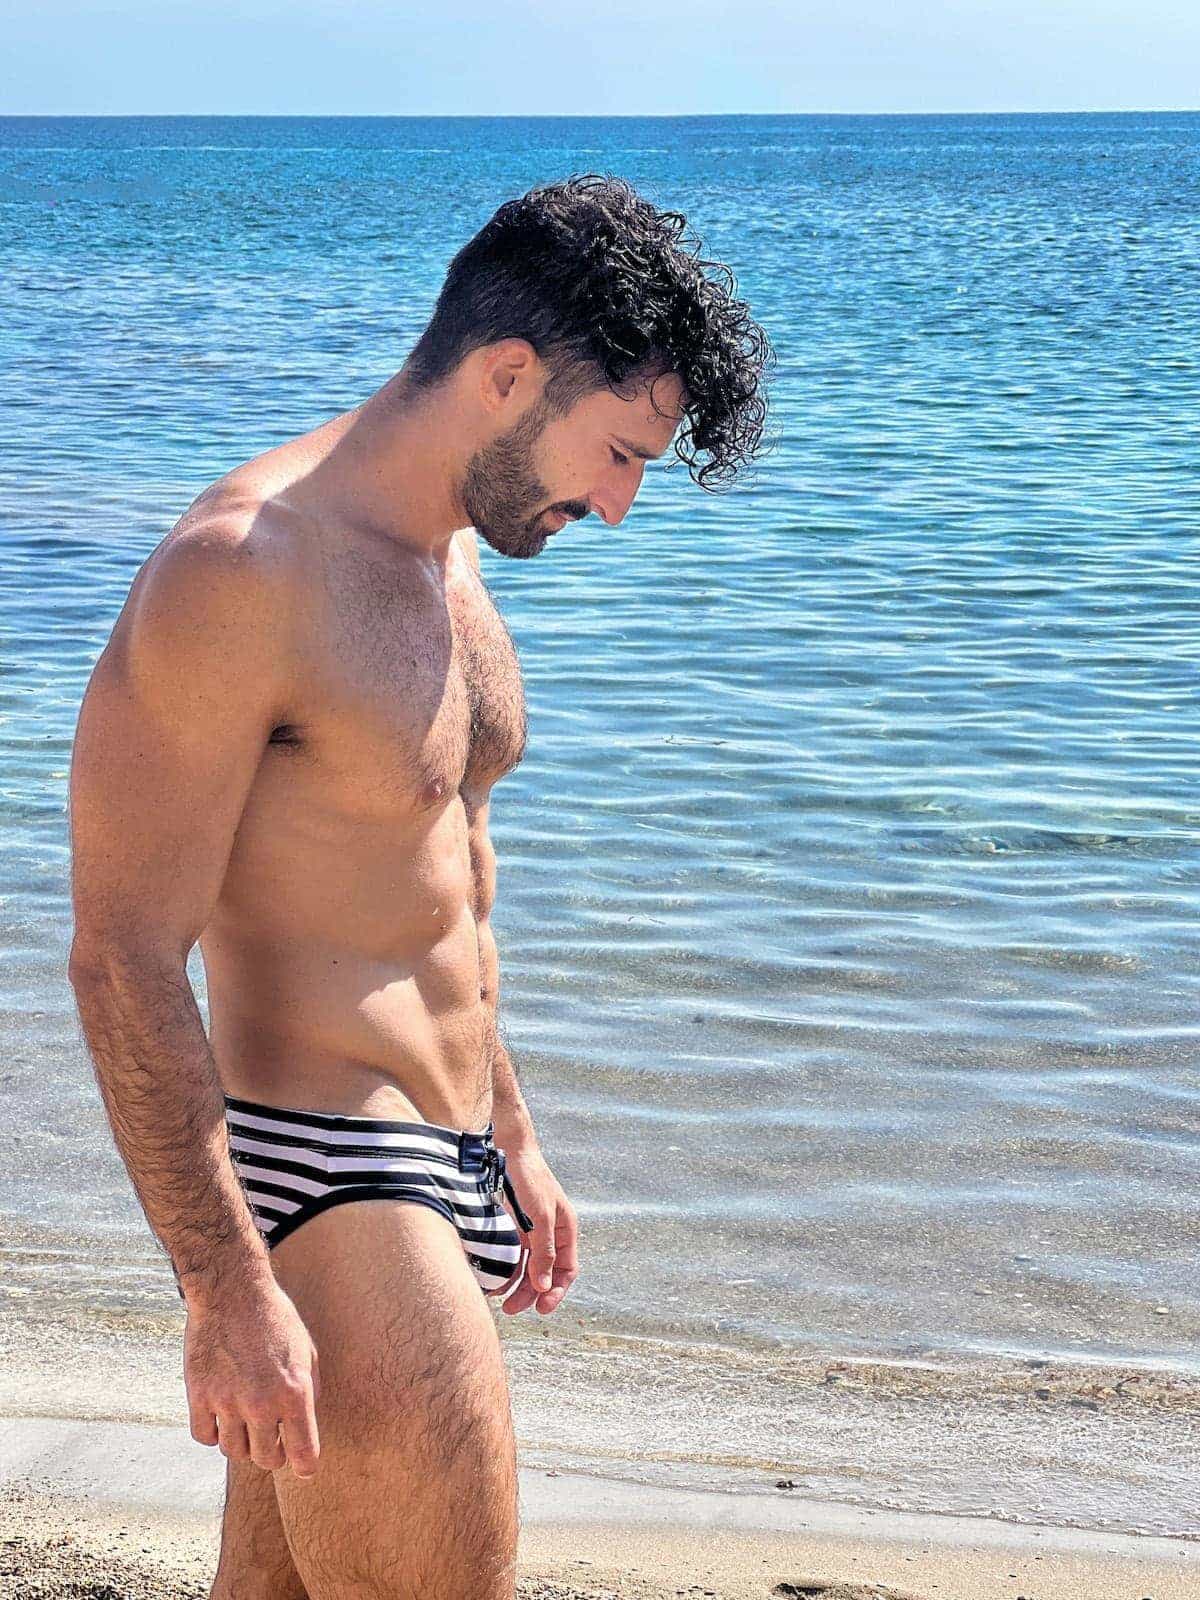 Stefan wearing his Addicted Sailor speedos at the beach.